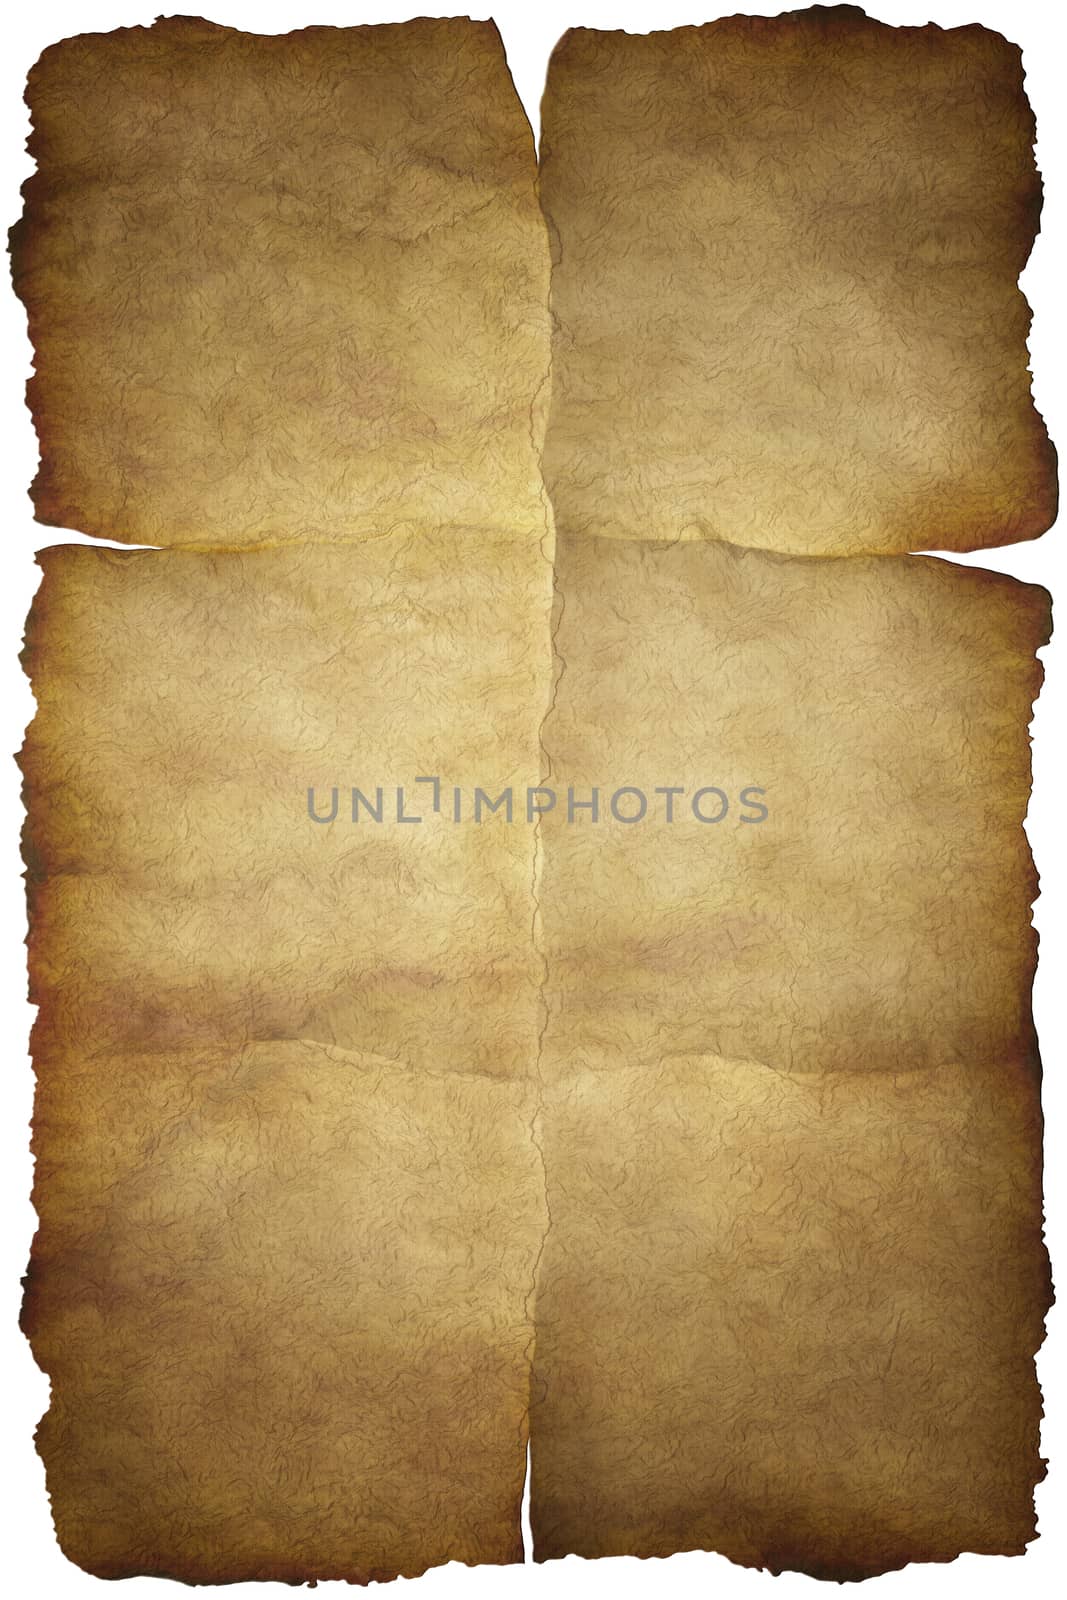 Old vintage paper texture or background with traces of folds